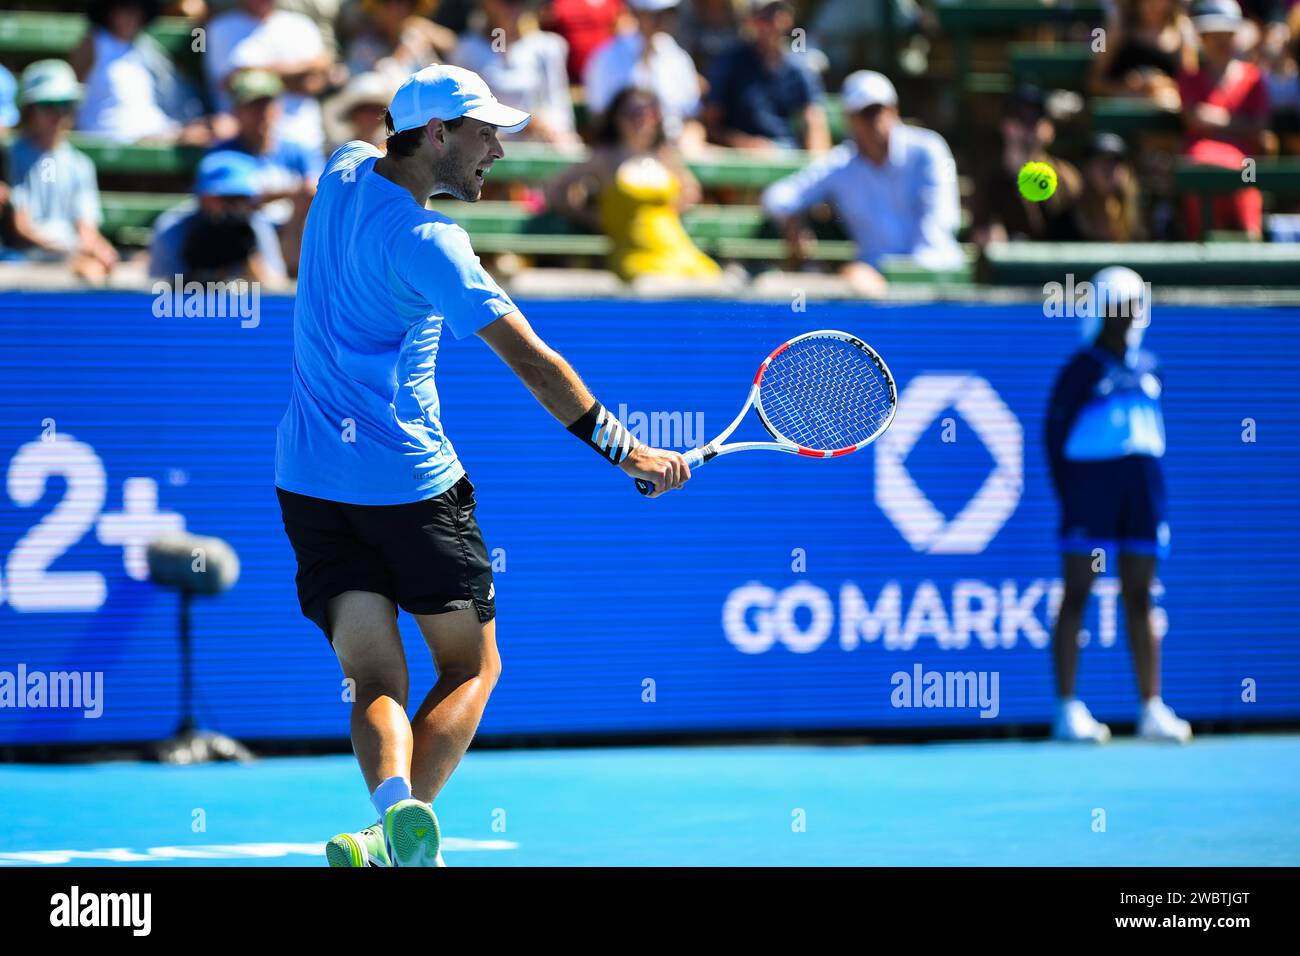 Dominic Thiem of Austria seen in action during third match of Day 2 of ...